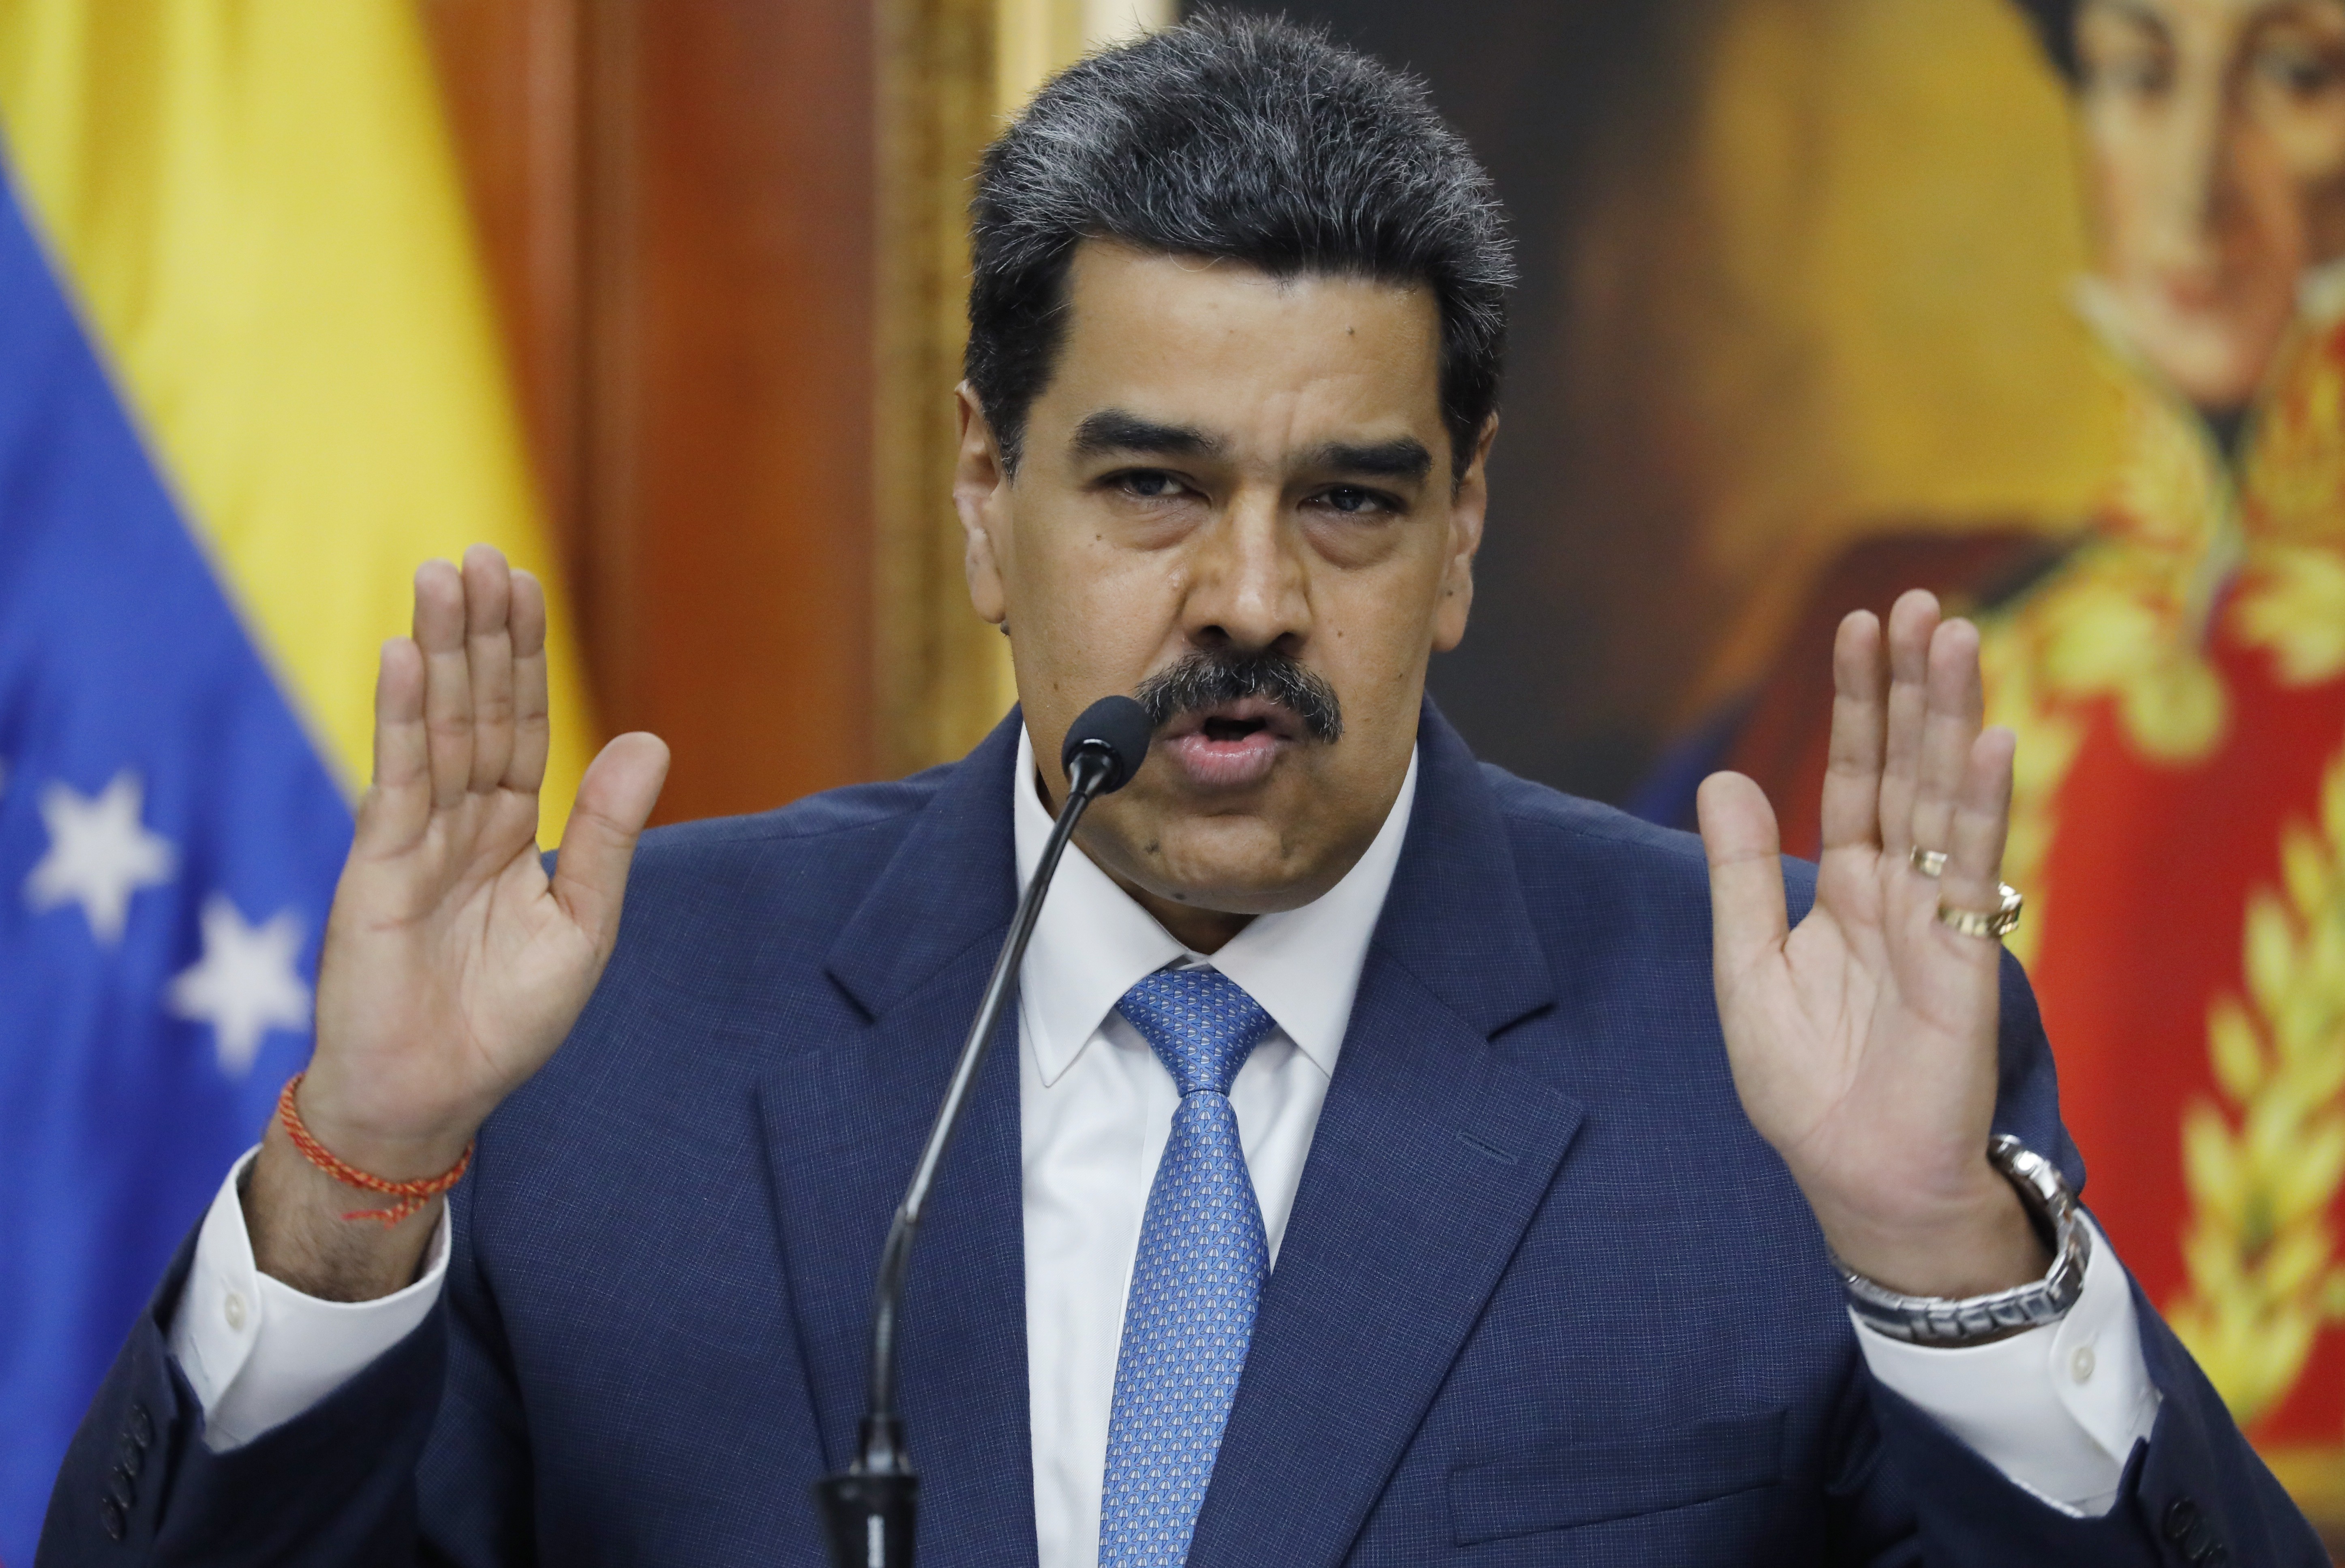 Venezuelan President Nicolas Maduro gives a press conference at Miraflores presidential palace in Caracas in February. Photo: AP